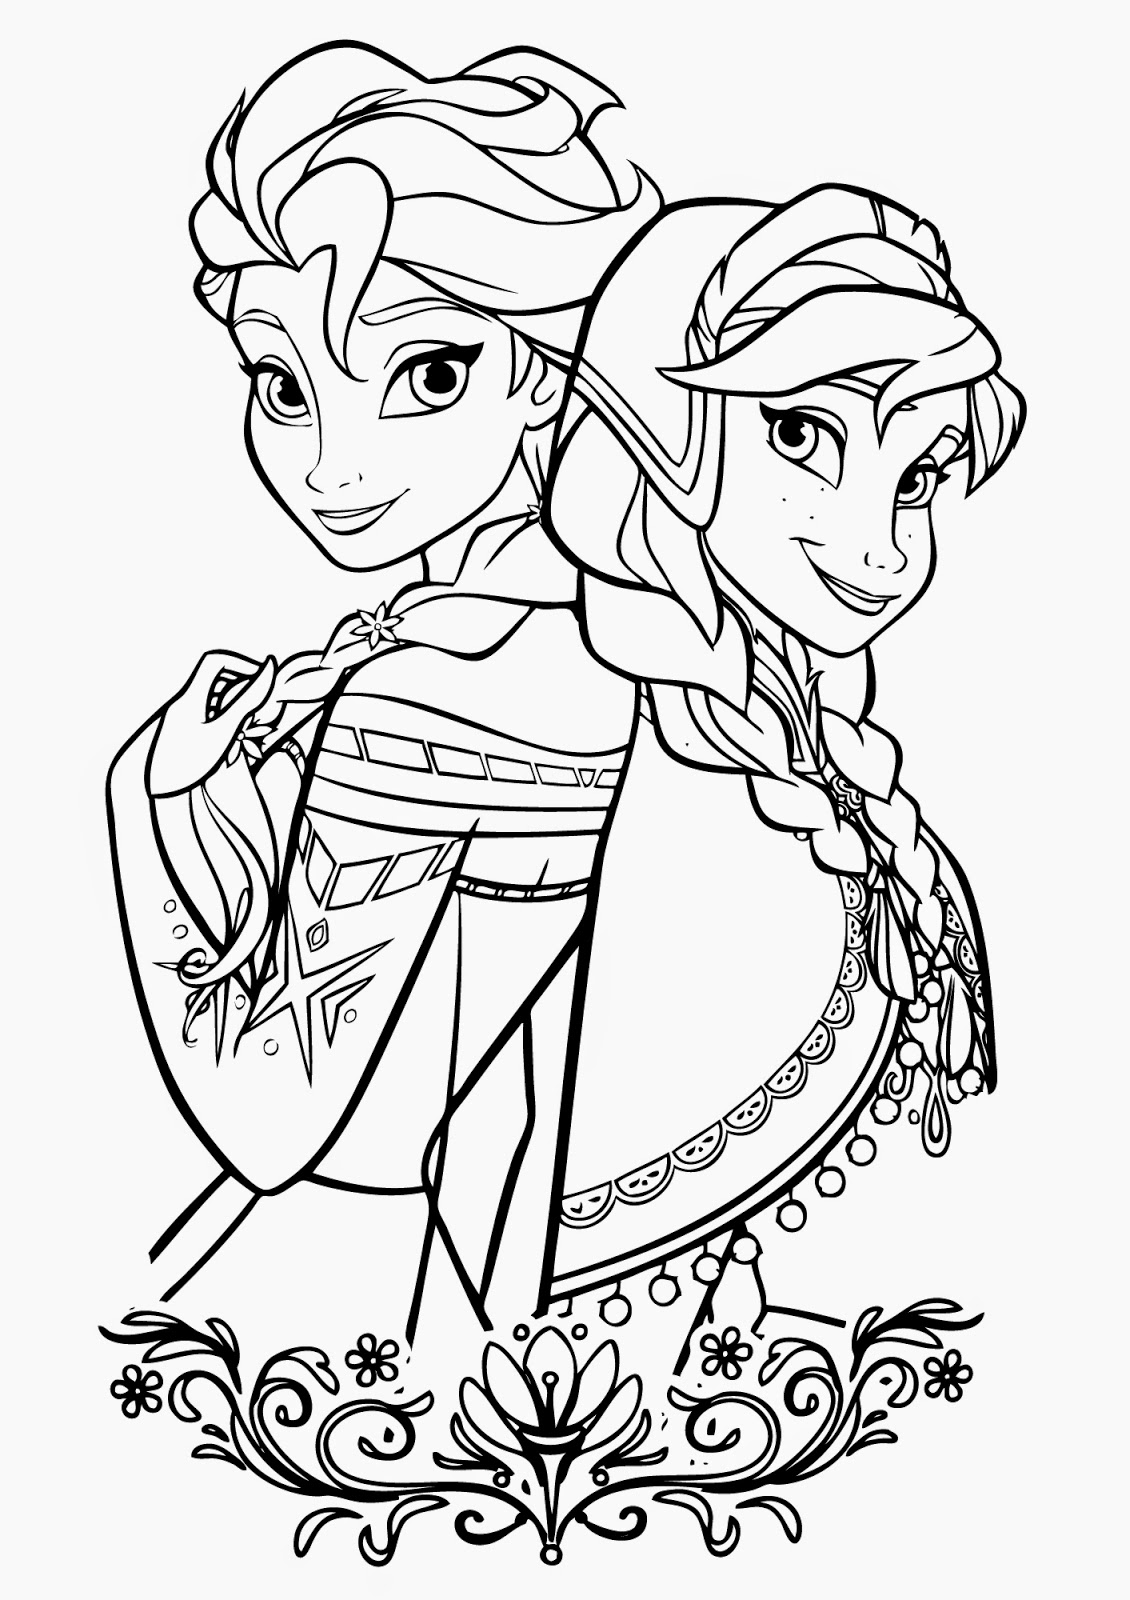 Drawing Frozen #71678 (Animation Movies) – Printable coloring pages